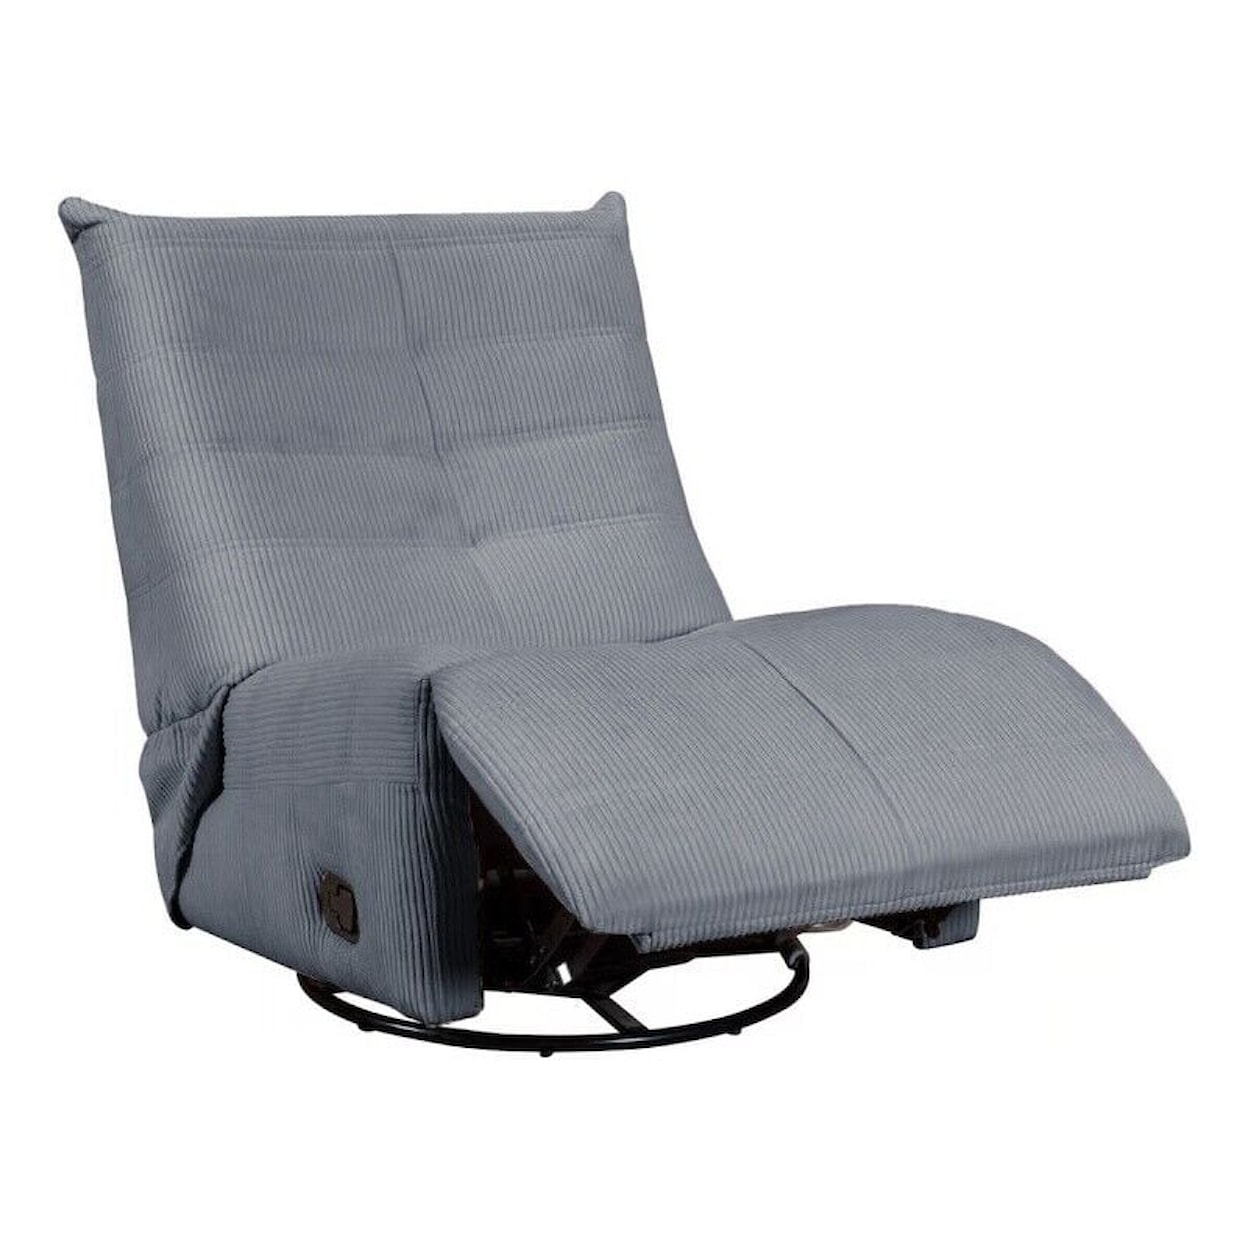 Lilola Home Gaming Chairs GREY CORDUORY SWIVEL GLIDER | RECLINING GAMI